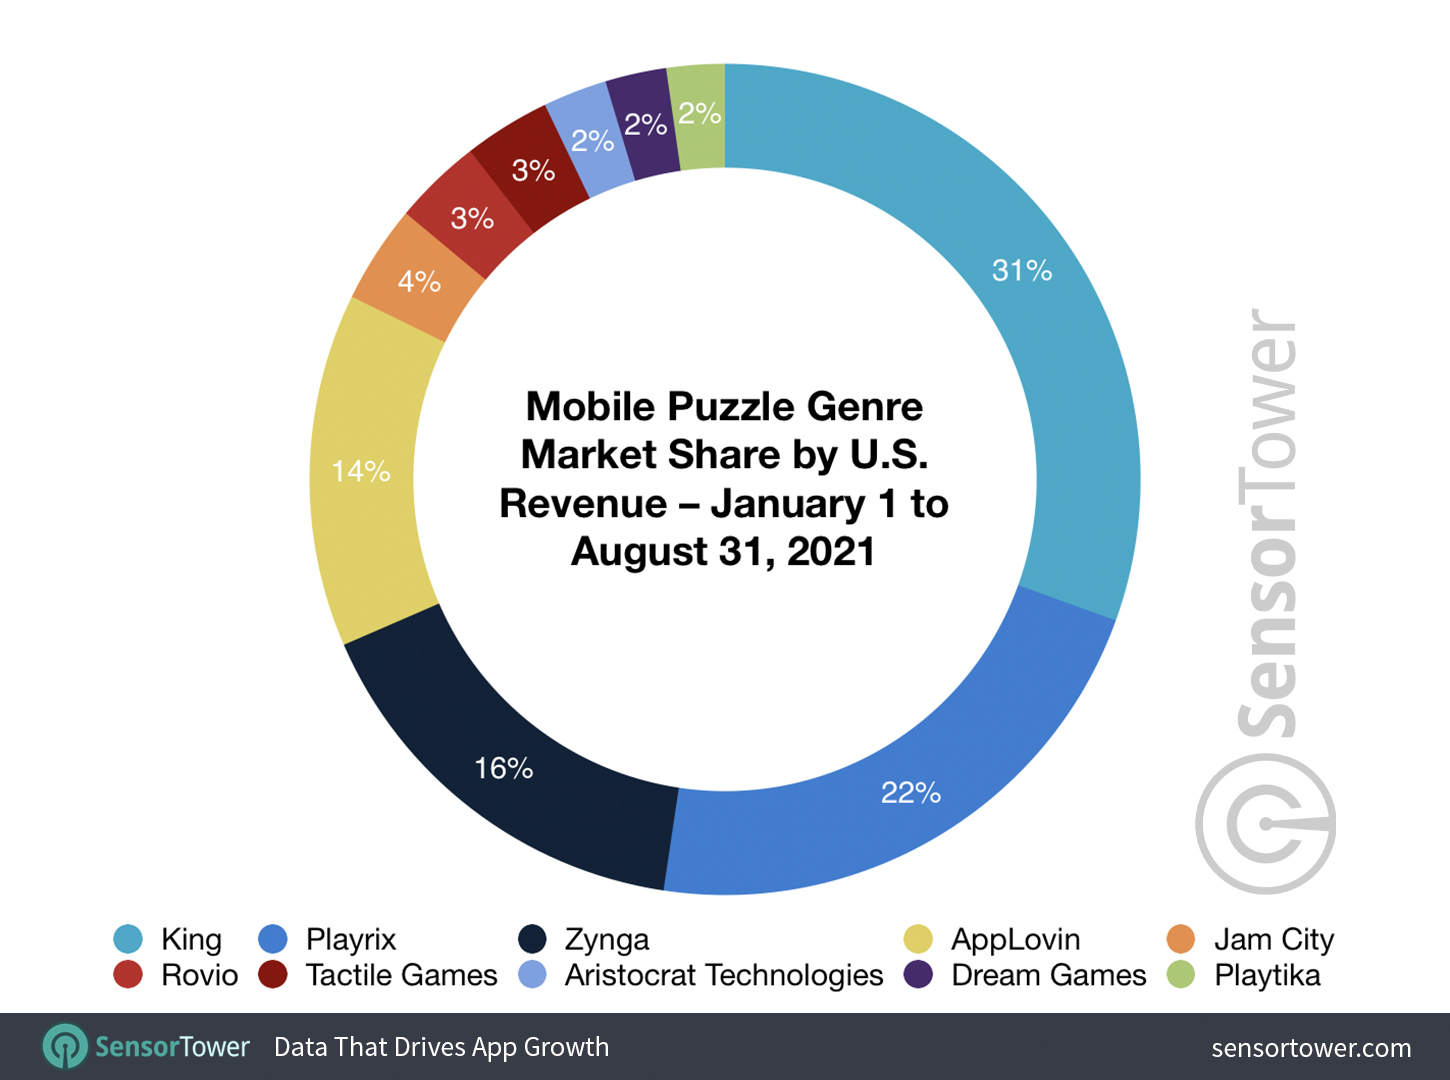 Mobile Puzzle Genre Market Share by U.S. Revenue – January 1 to August 31, 2021